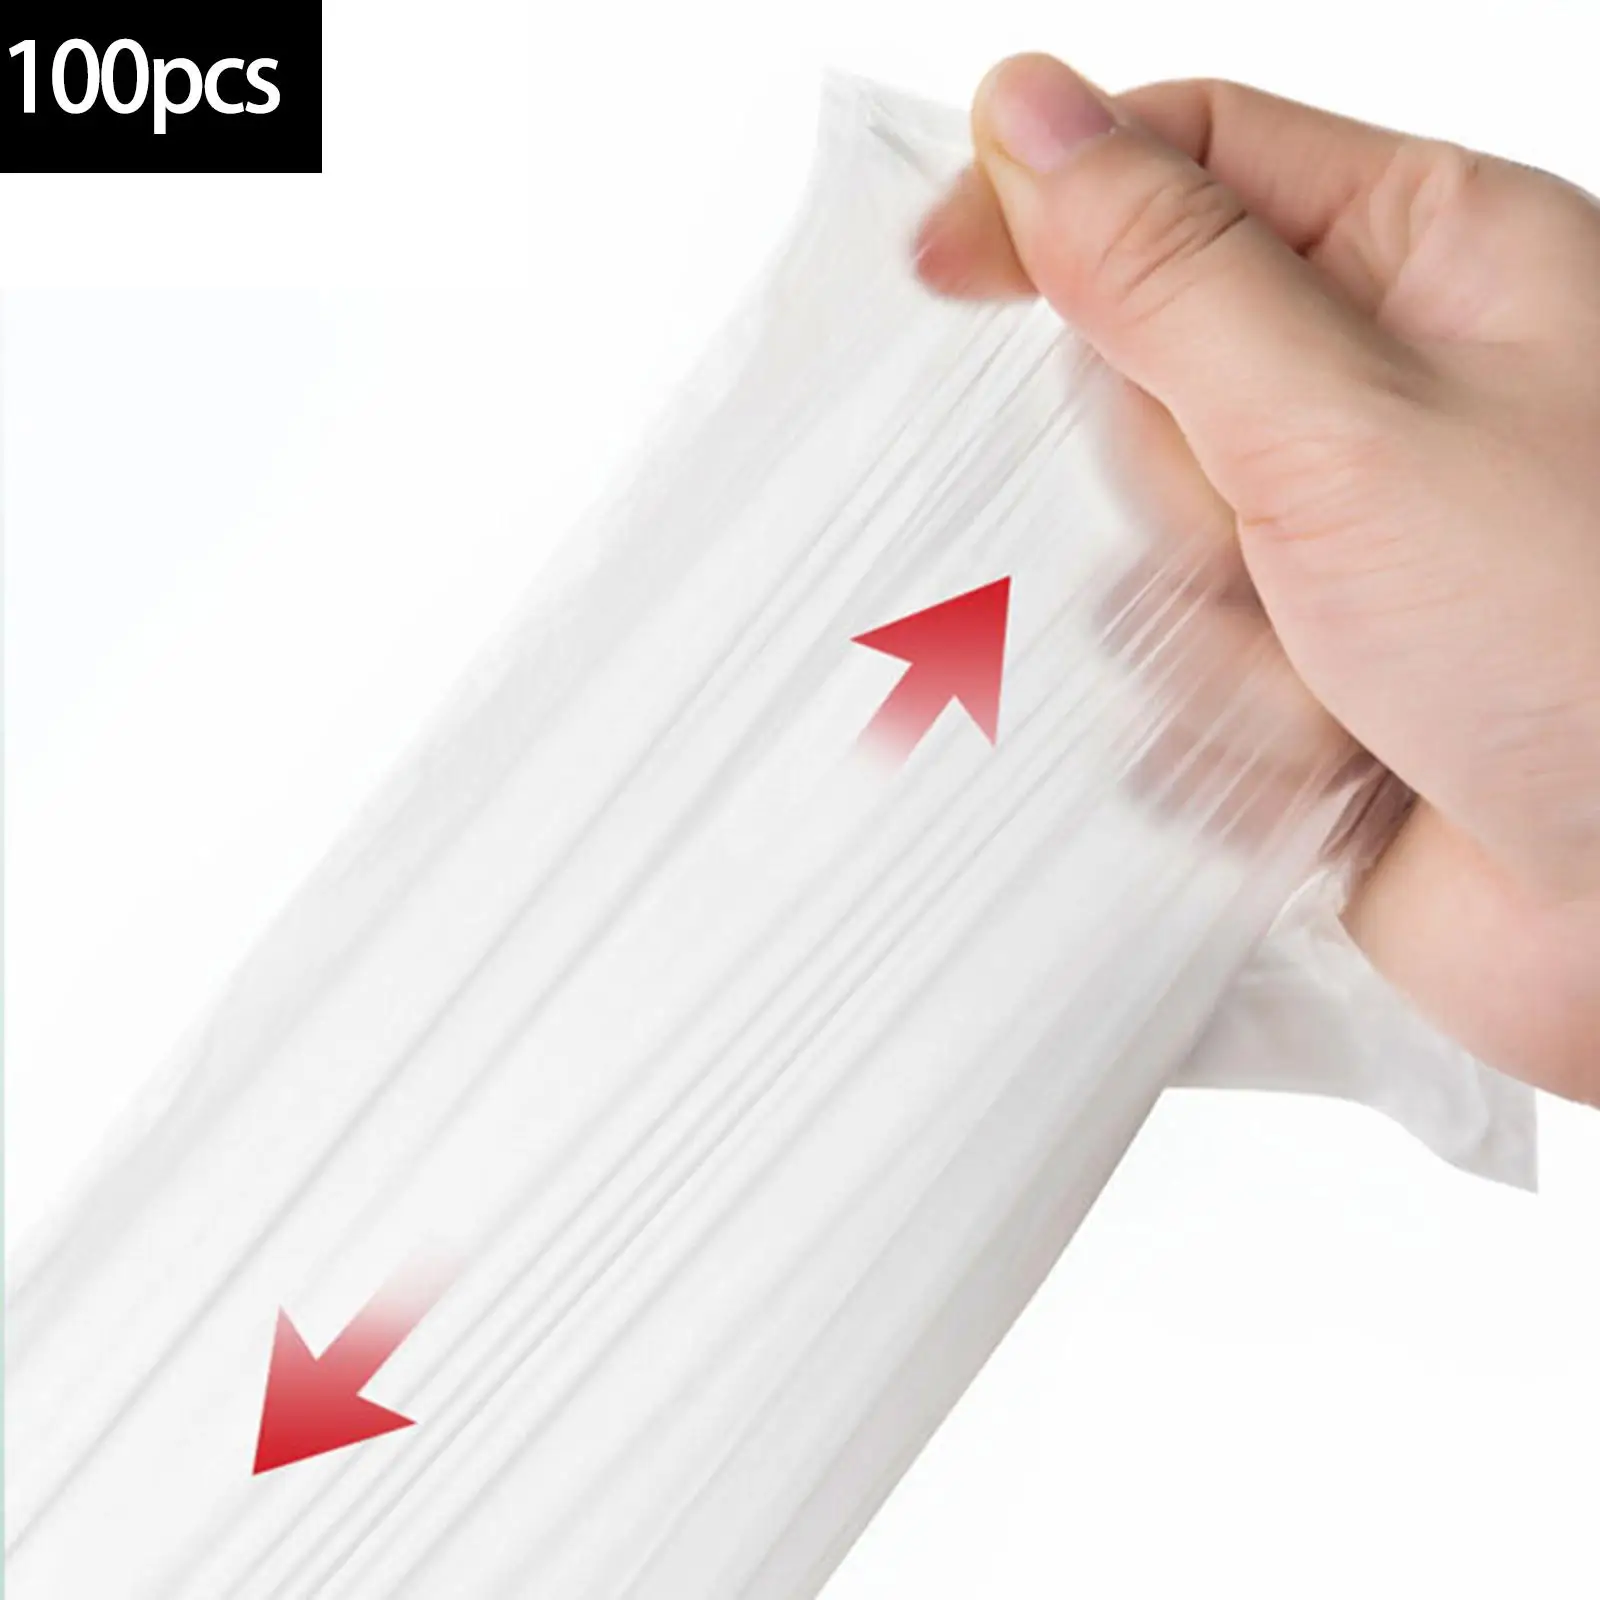 10 Rolls 100 Pieces Toilet Cleaning Bag with Drawstring for Kids, ,42x23cm Portable Lightweight Adults Pets Use Thick